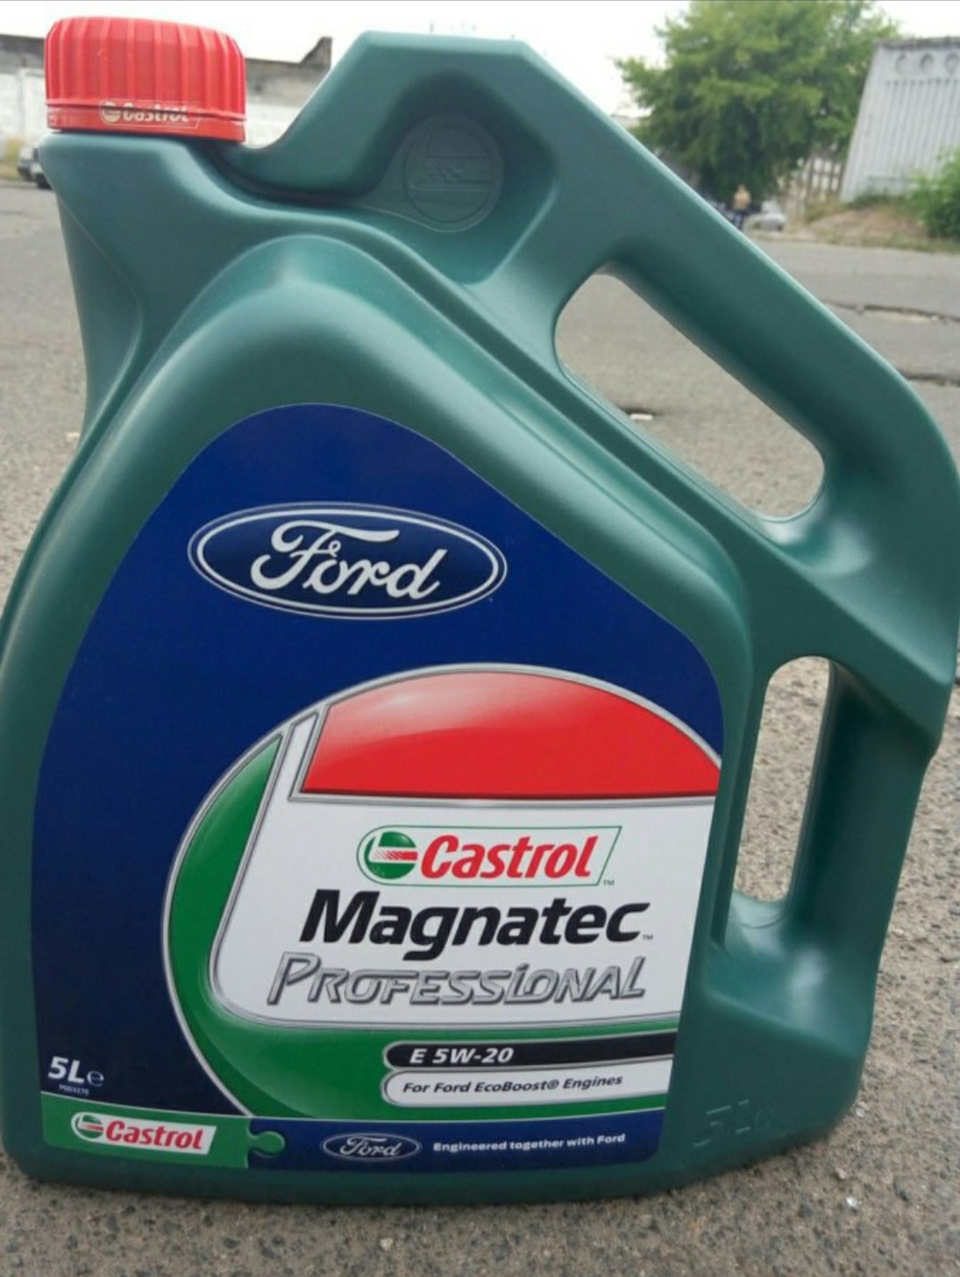 Масло castrol ford. Ford Castrol Magnatec professional e 5w20 5л. Castrol Ford 5w20 5л. Castrol Magnatec 5w20 Ford. Масло моторное 5w20 кастрол Форд.